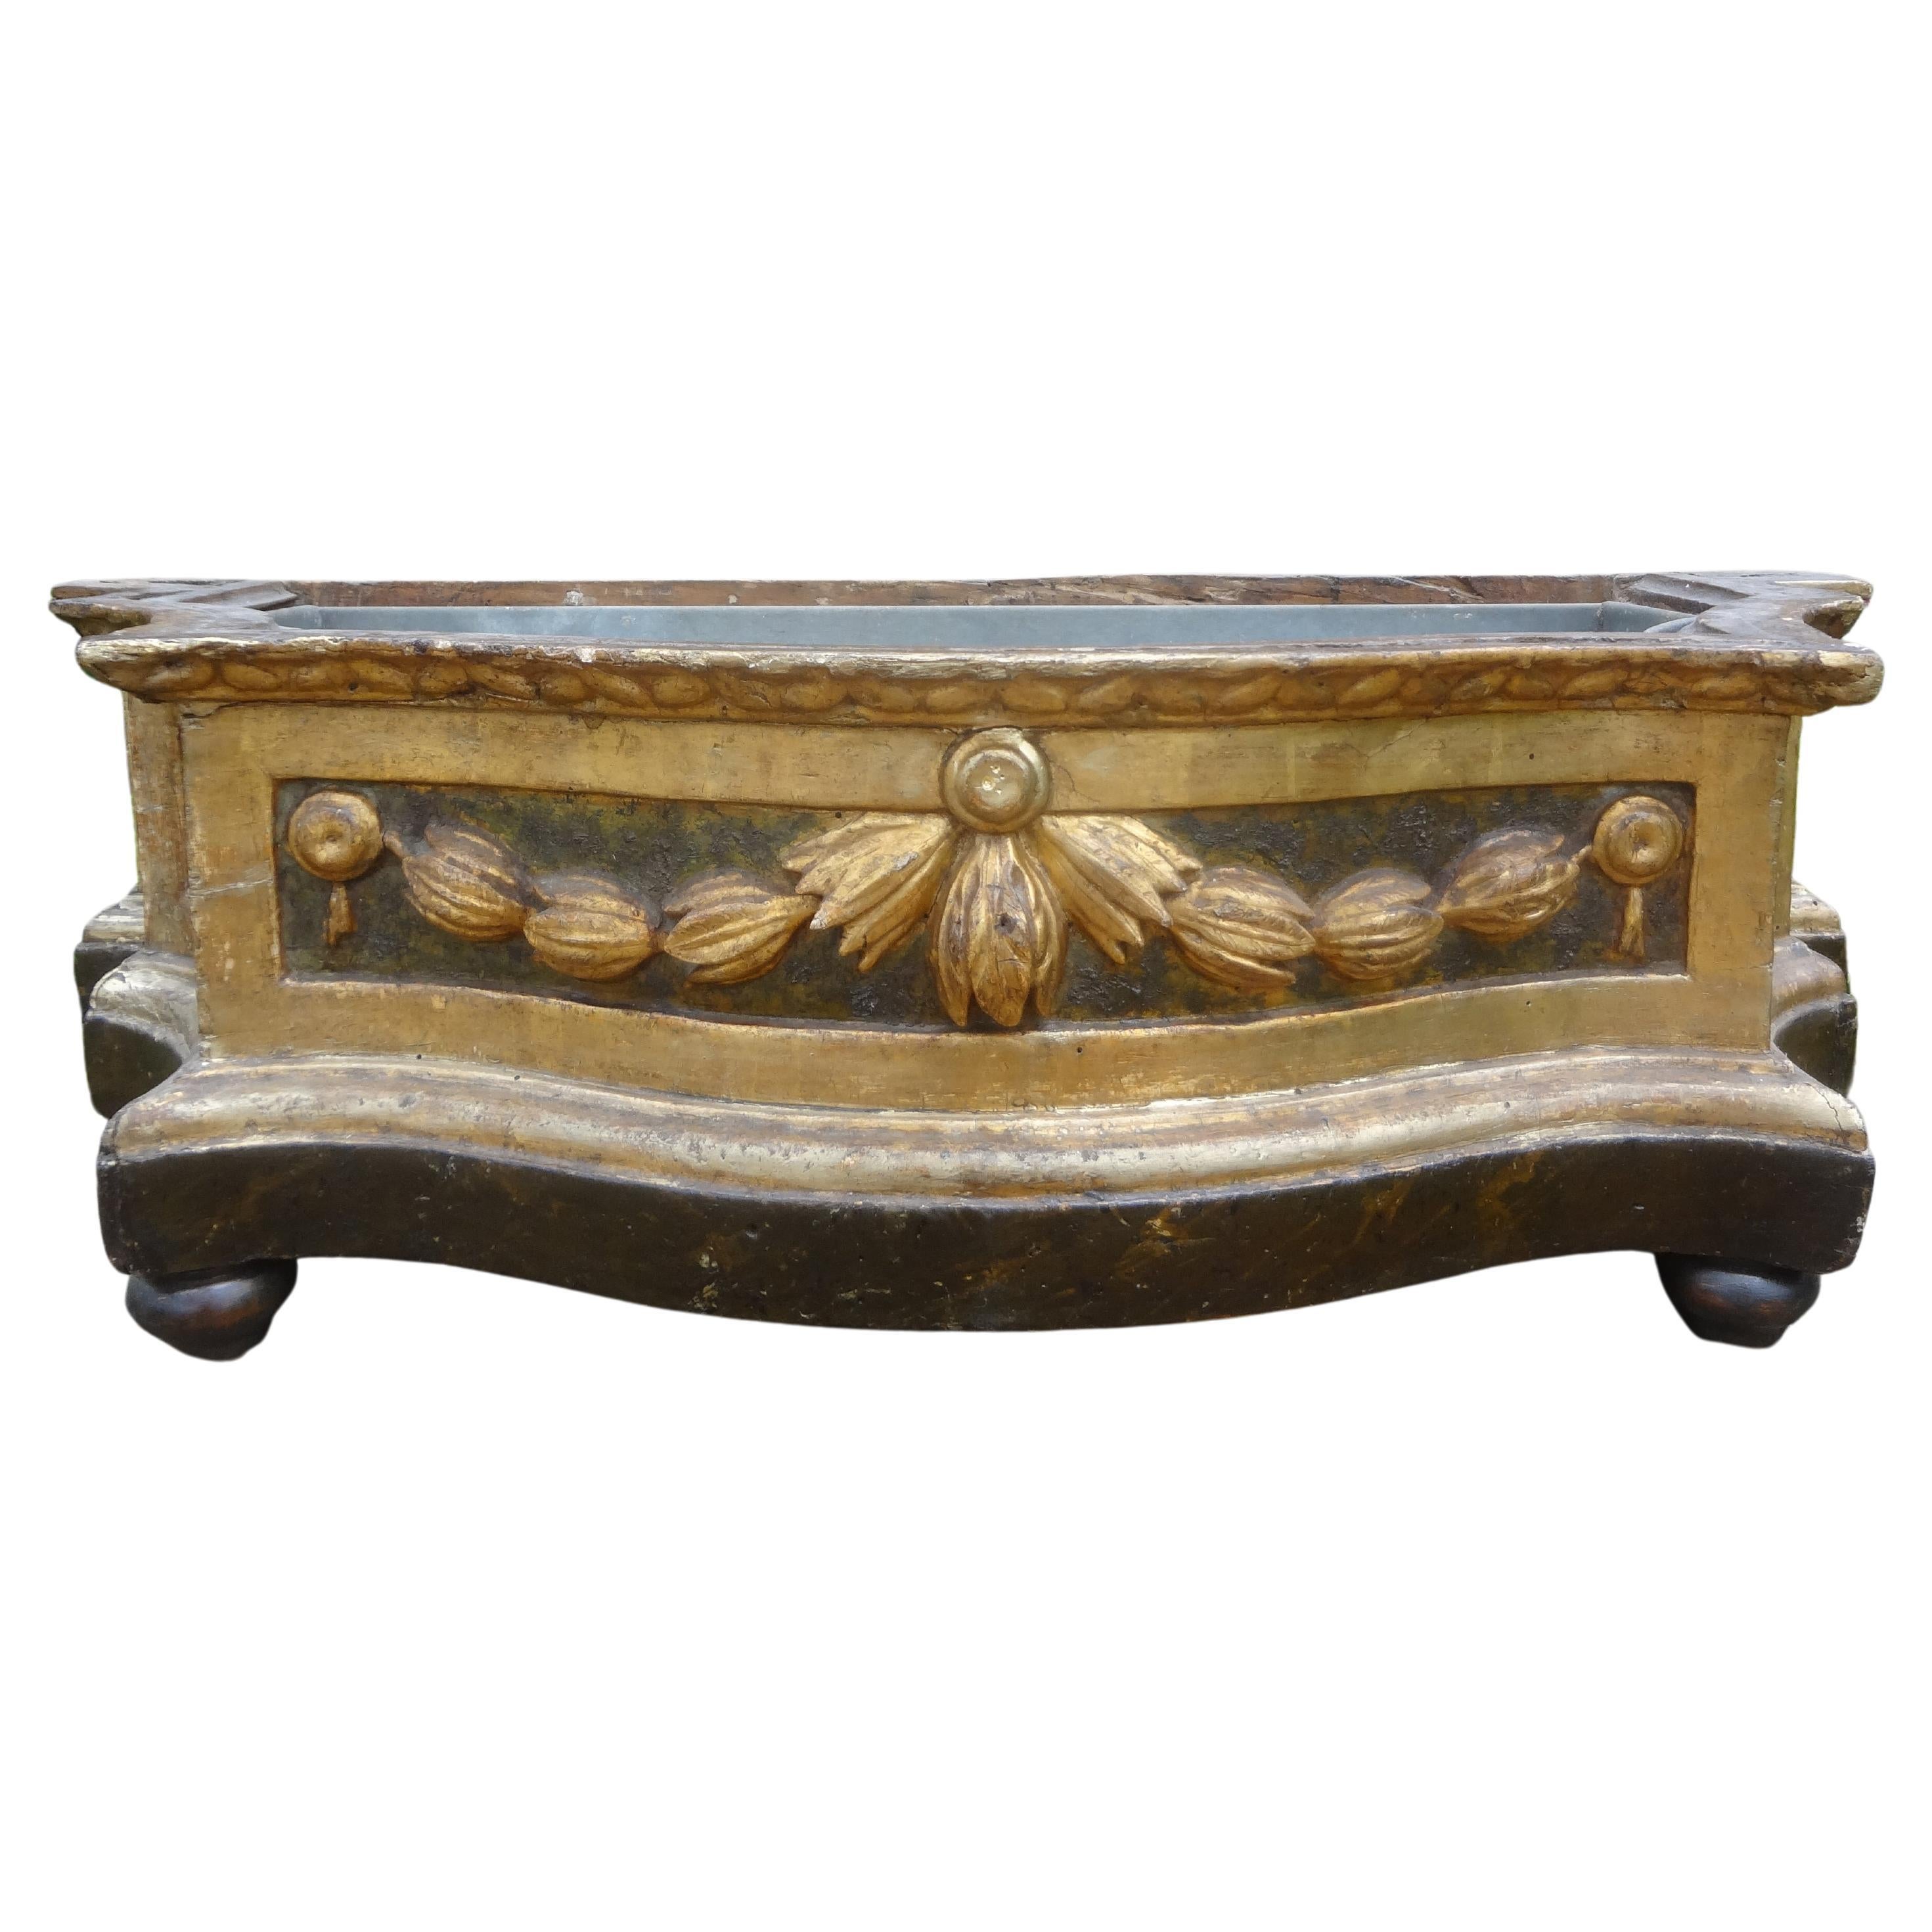 19th Century Italian Louis XVI Style Carved Wood Planter For Sale